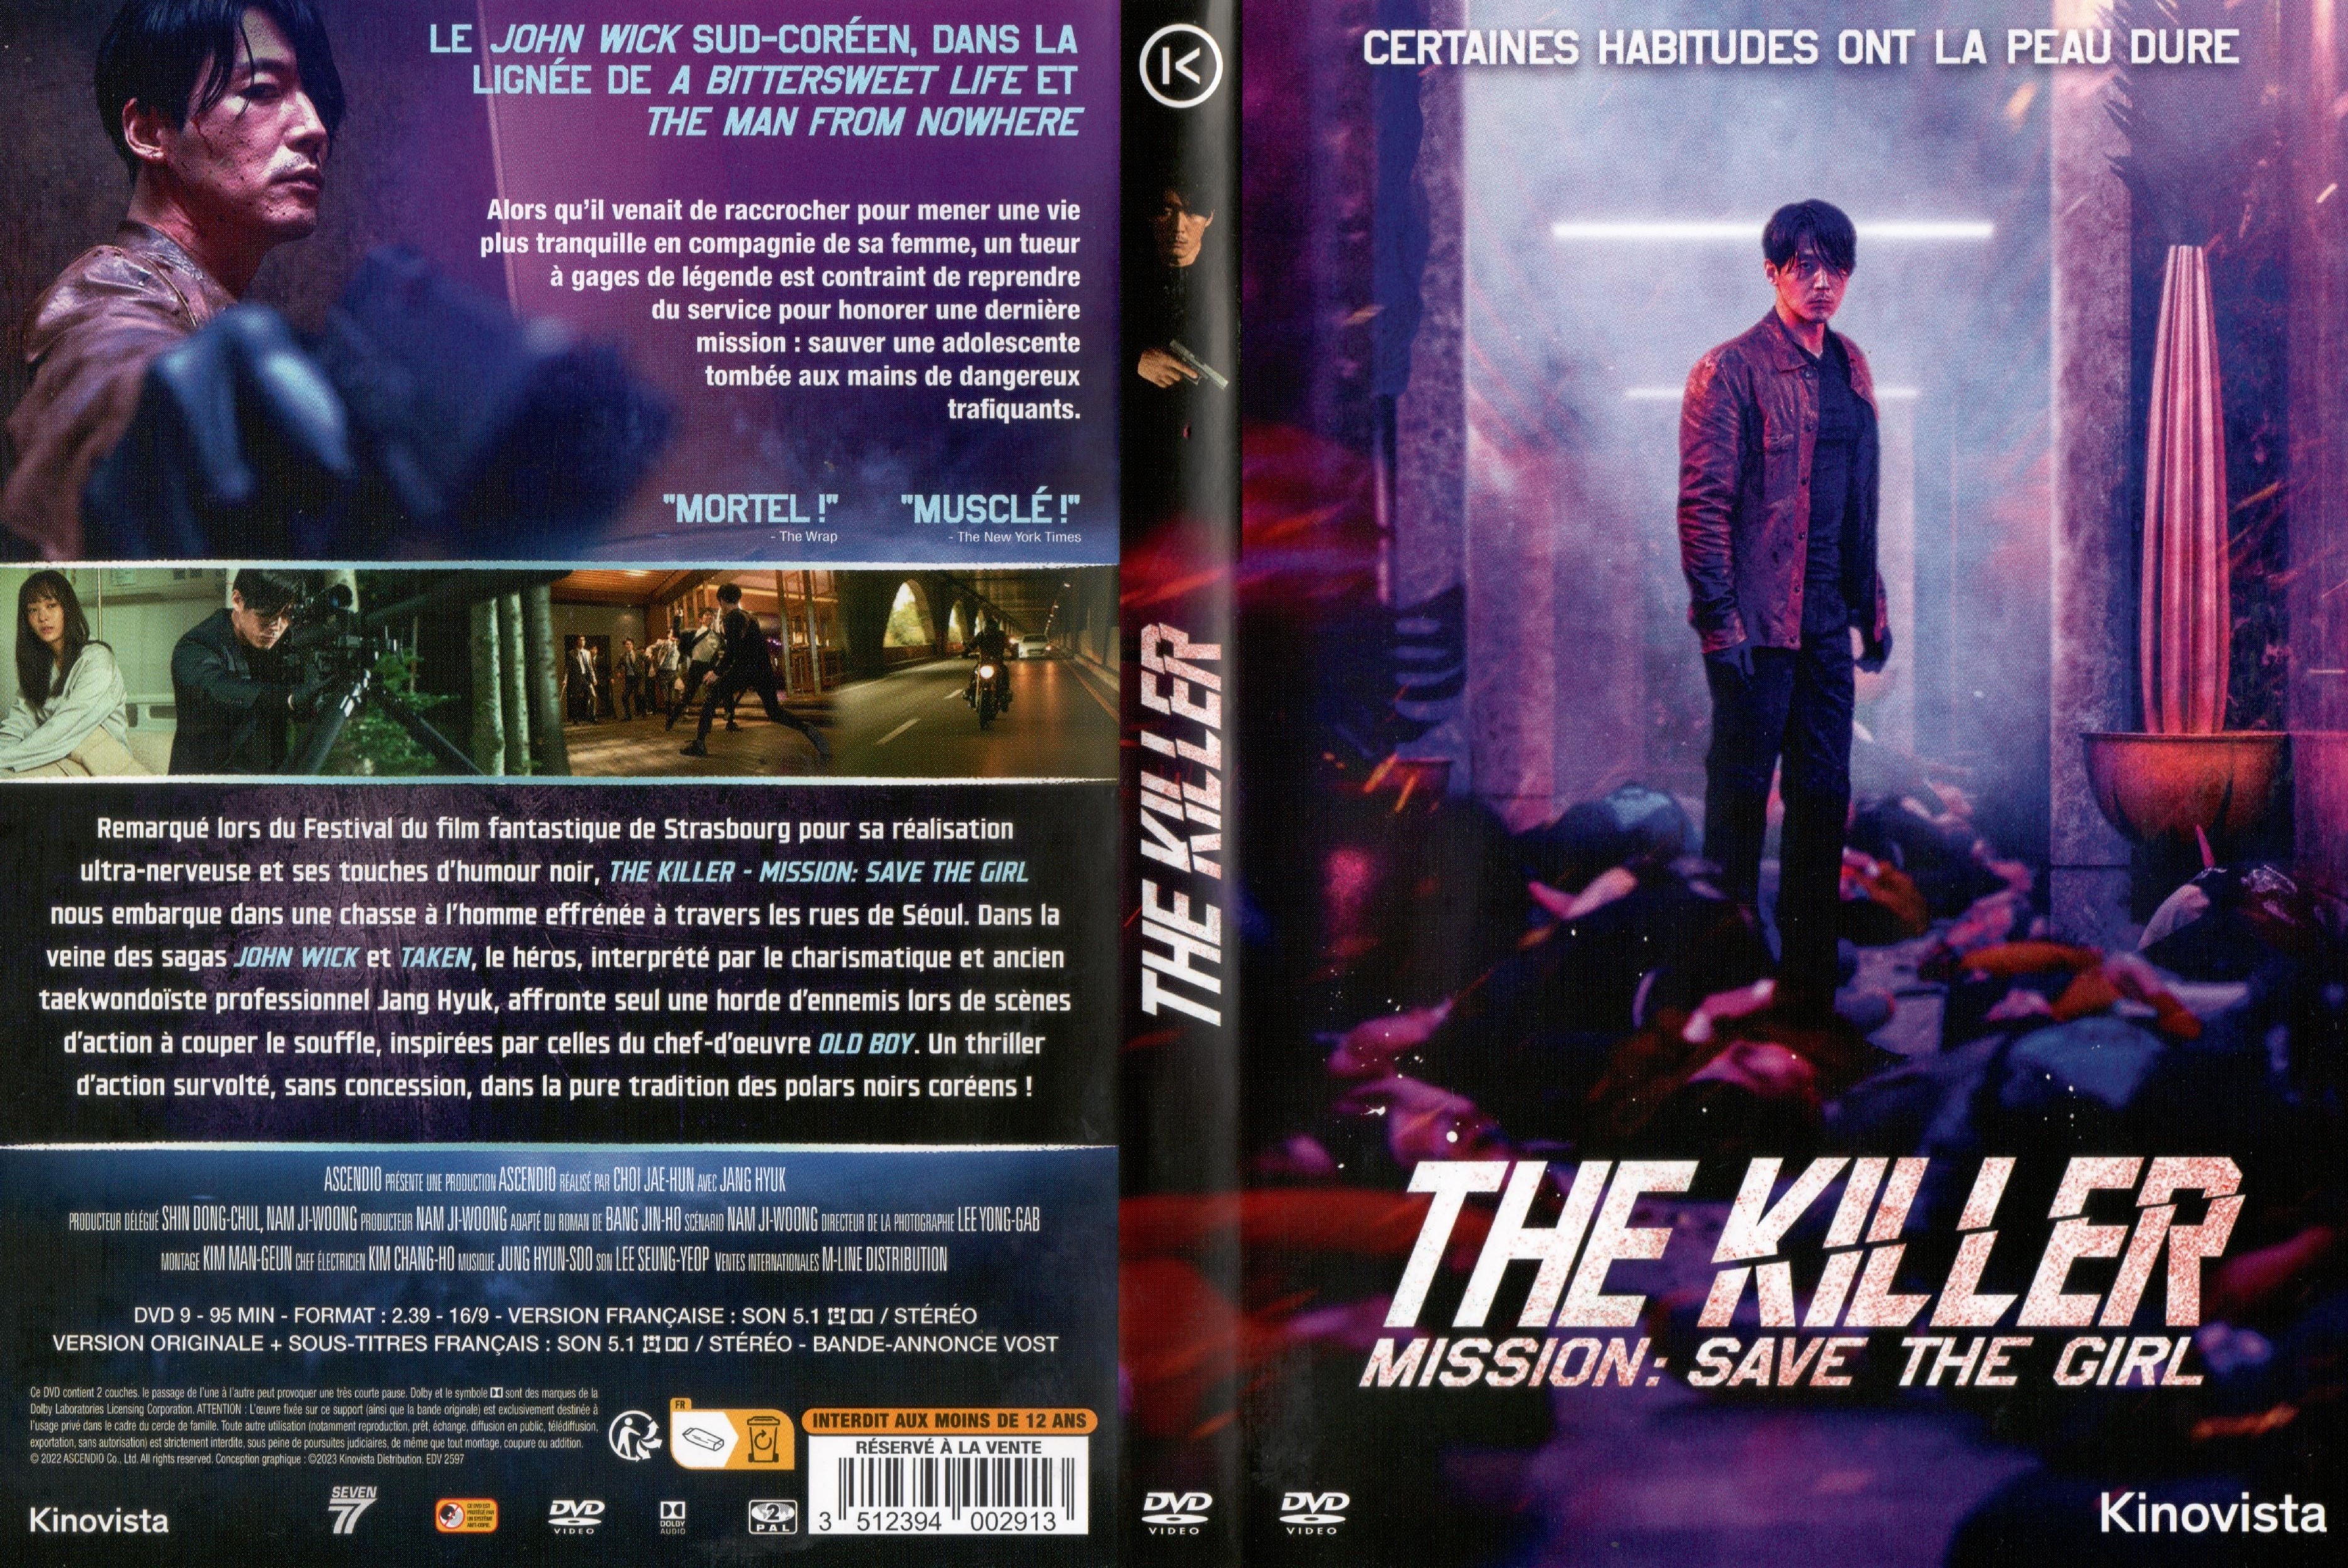 Jaquette DVD The killer mission save the girl